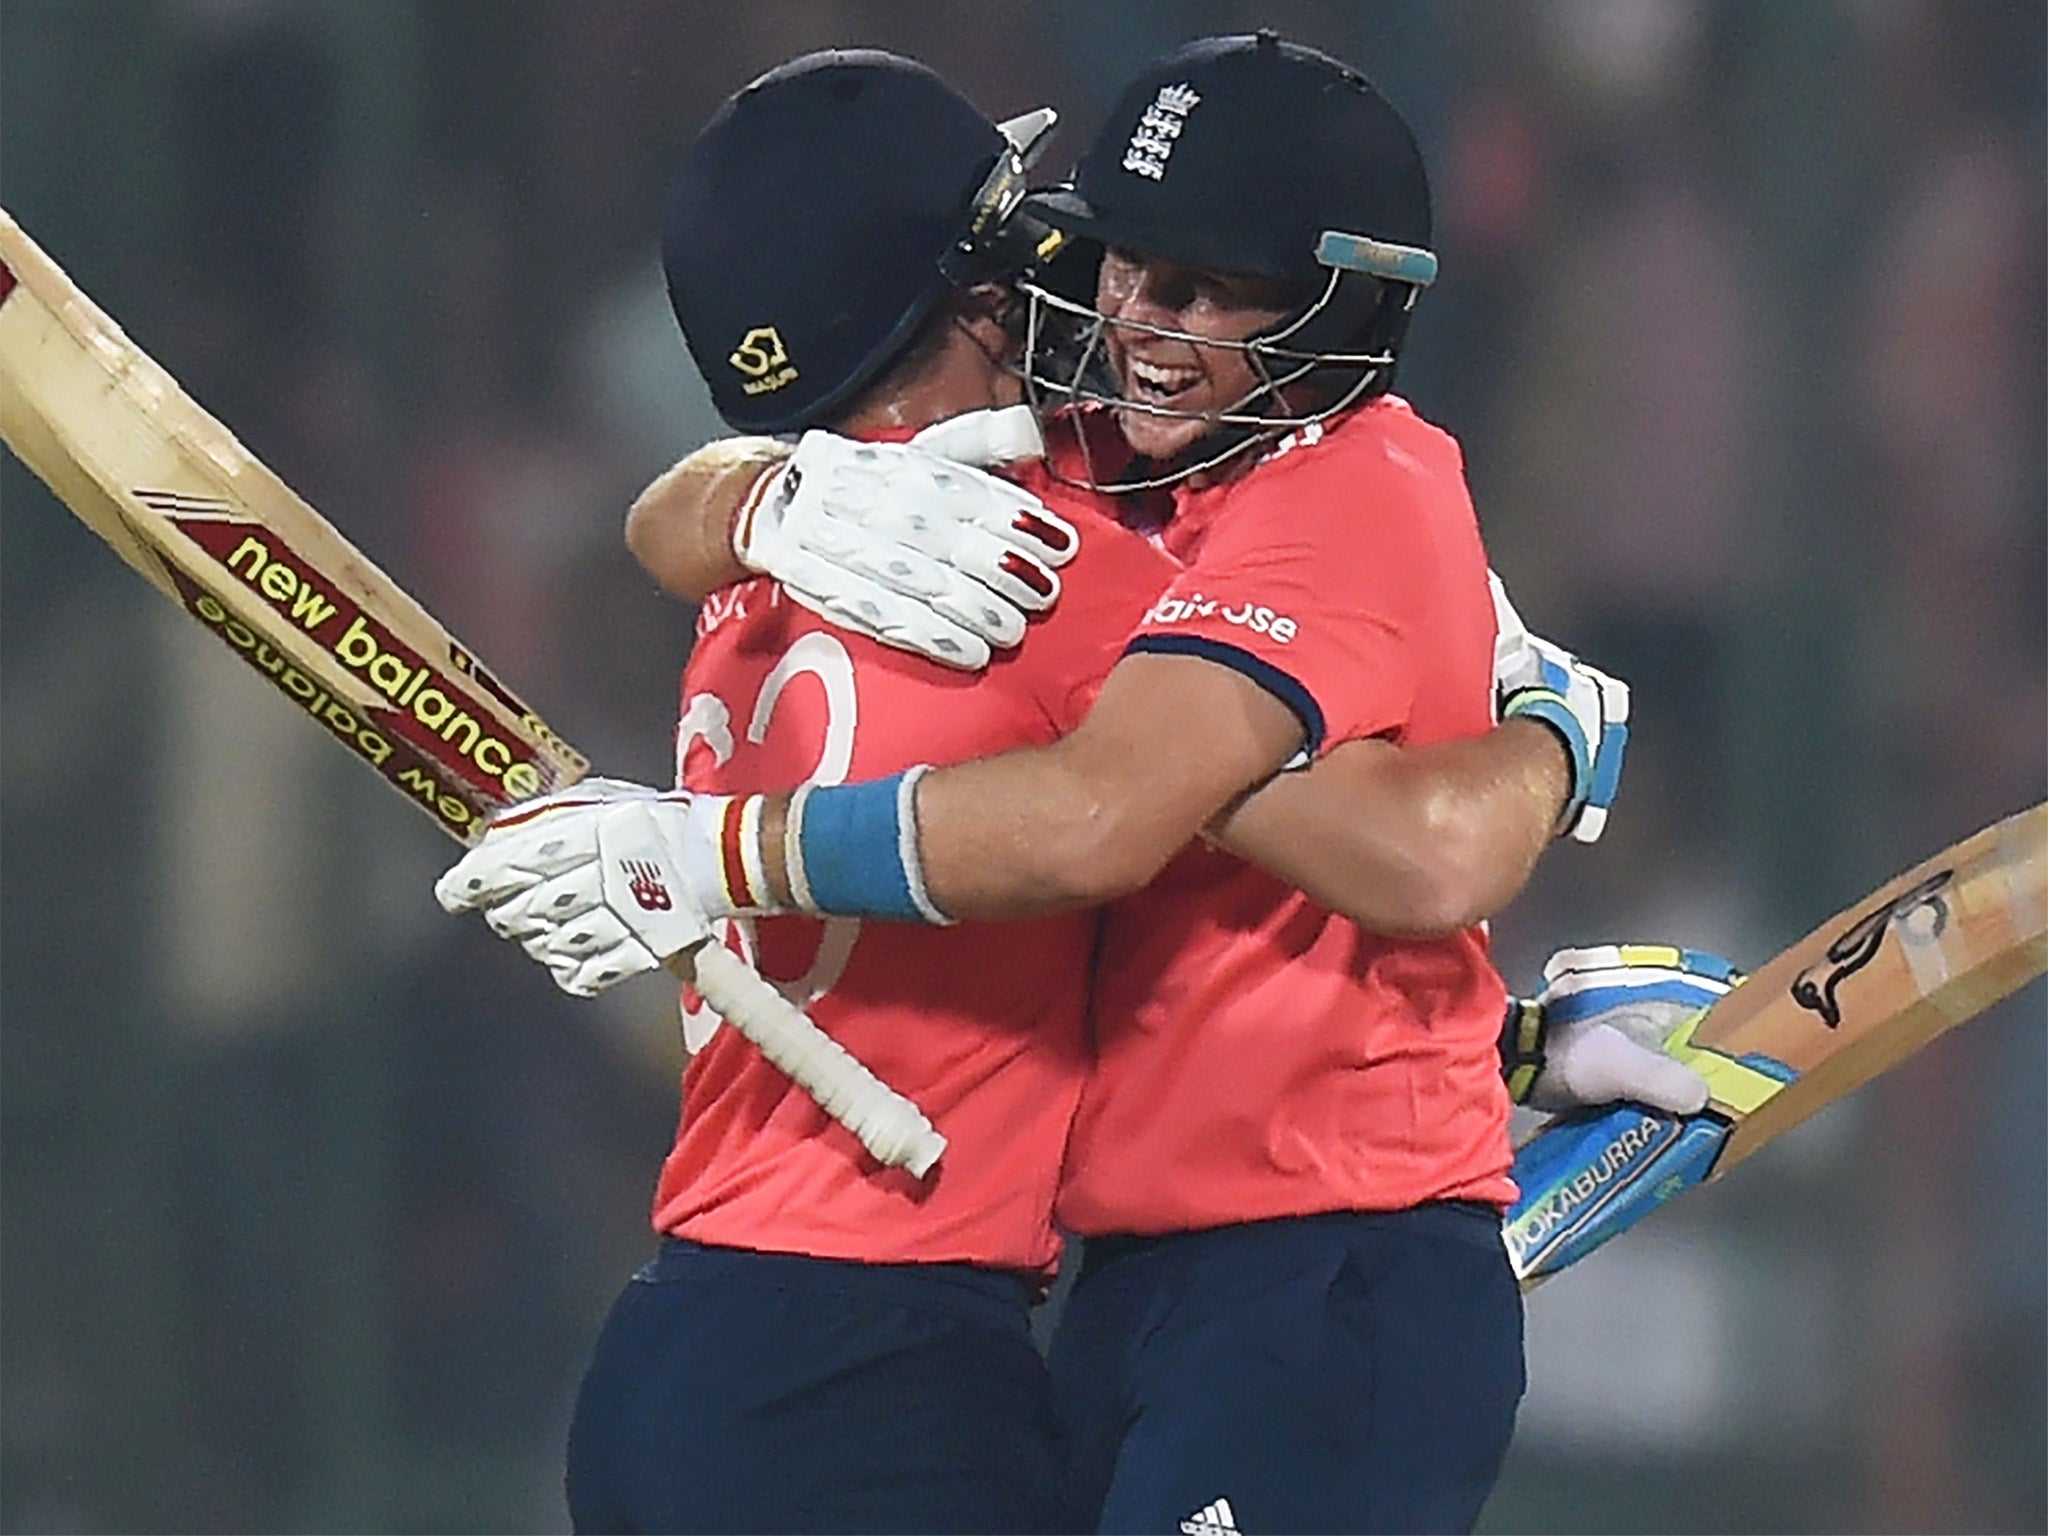 Jos Buttler and Joe Root celebrate England's semi-final victory